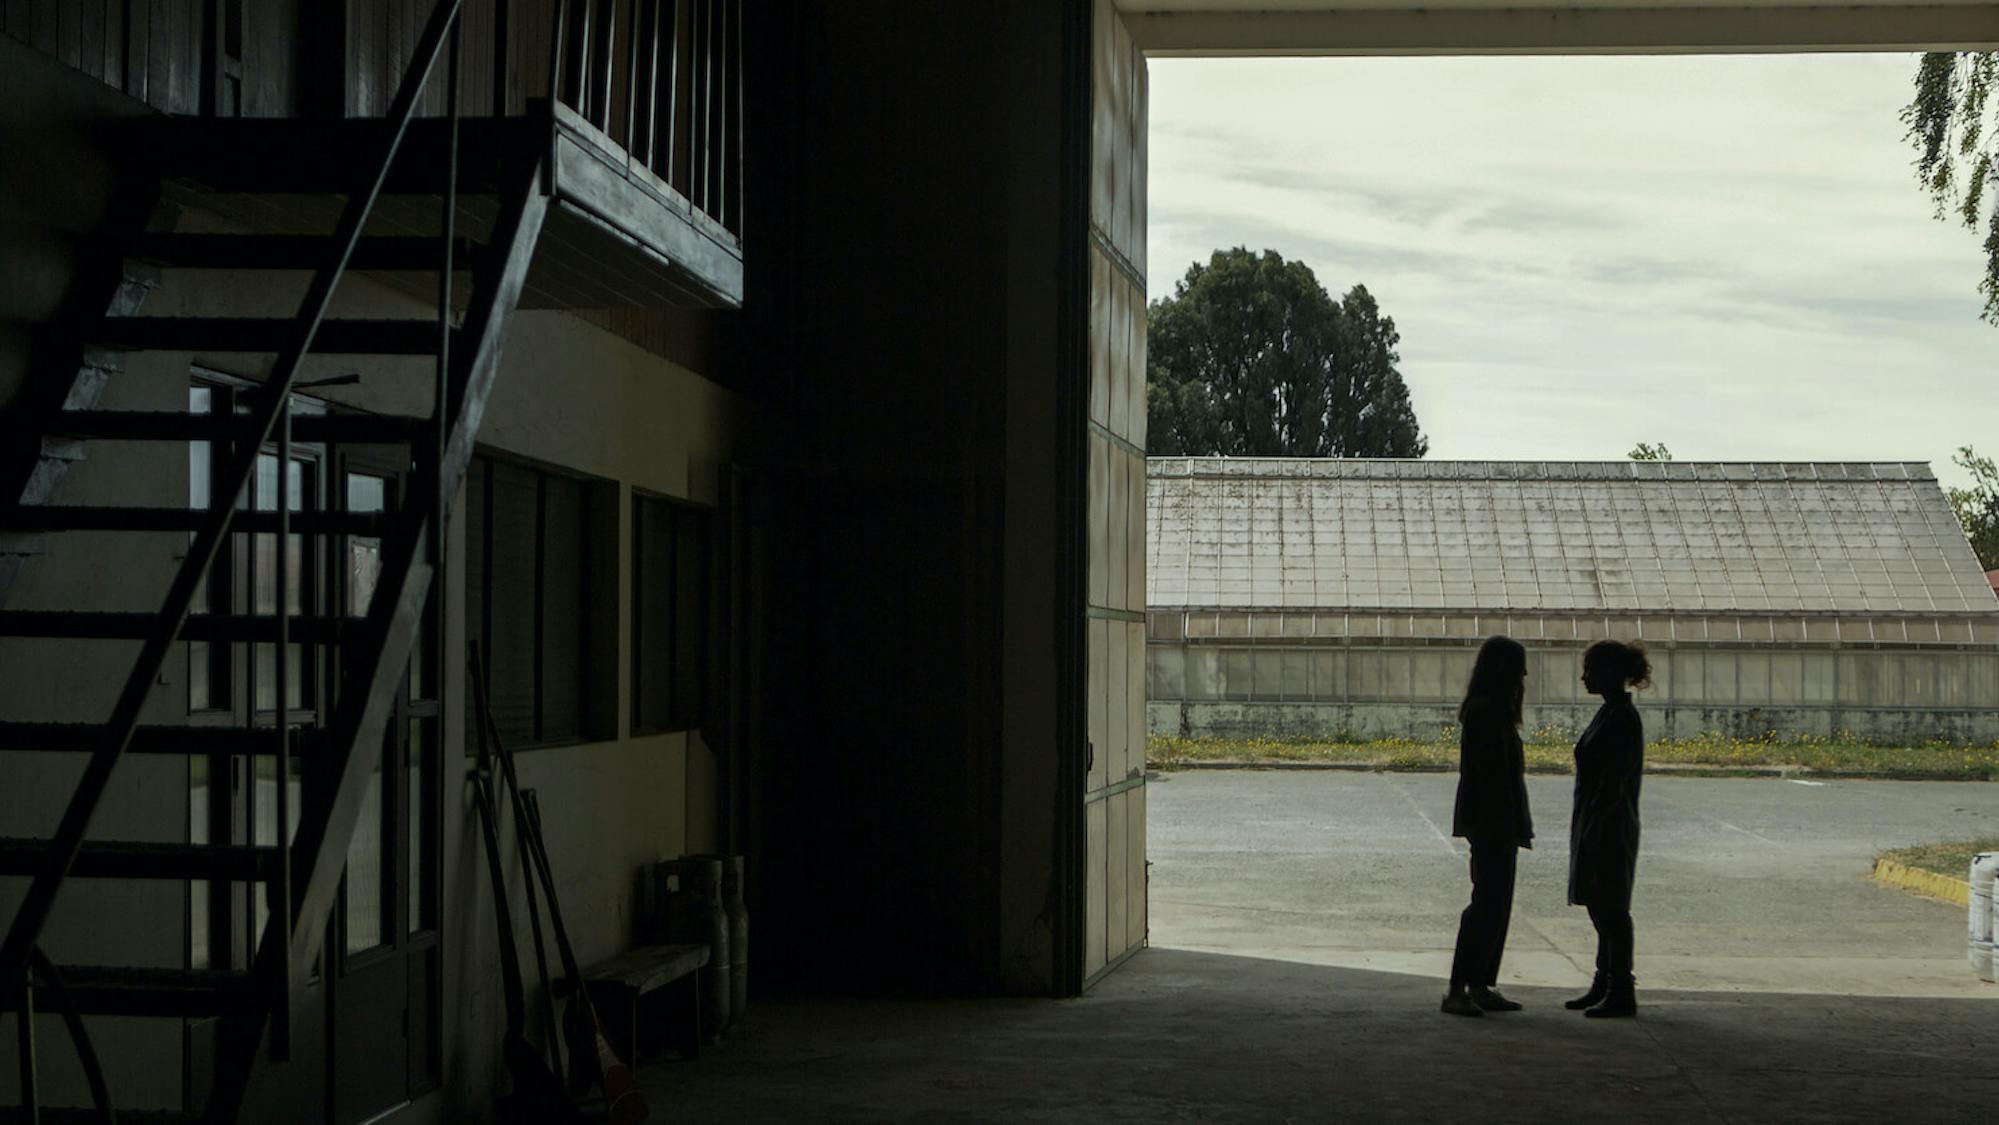 Amanda (María Valverde) and Carola (Dolores Fonzi) stand across from each other in an empty barn. Their figures are hardly discernible in this shadowy space. 